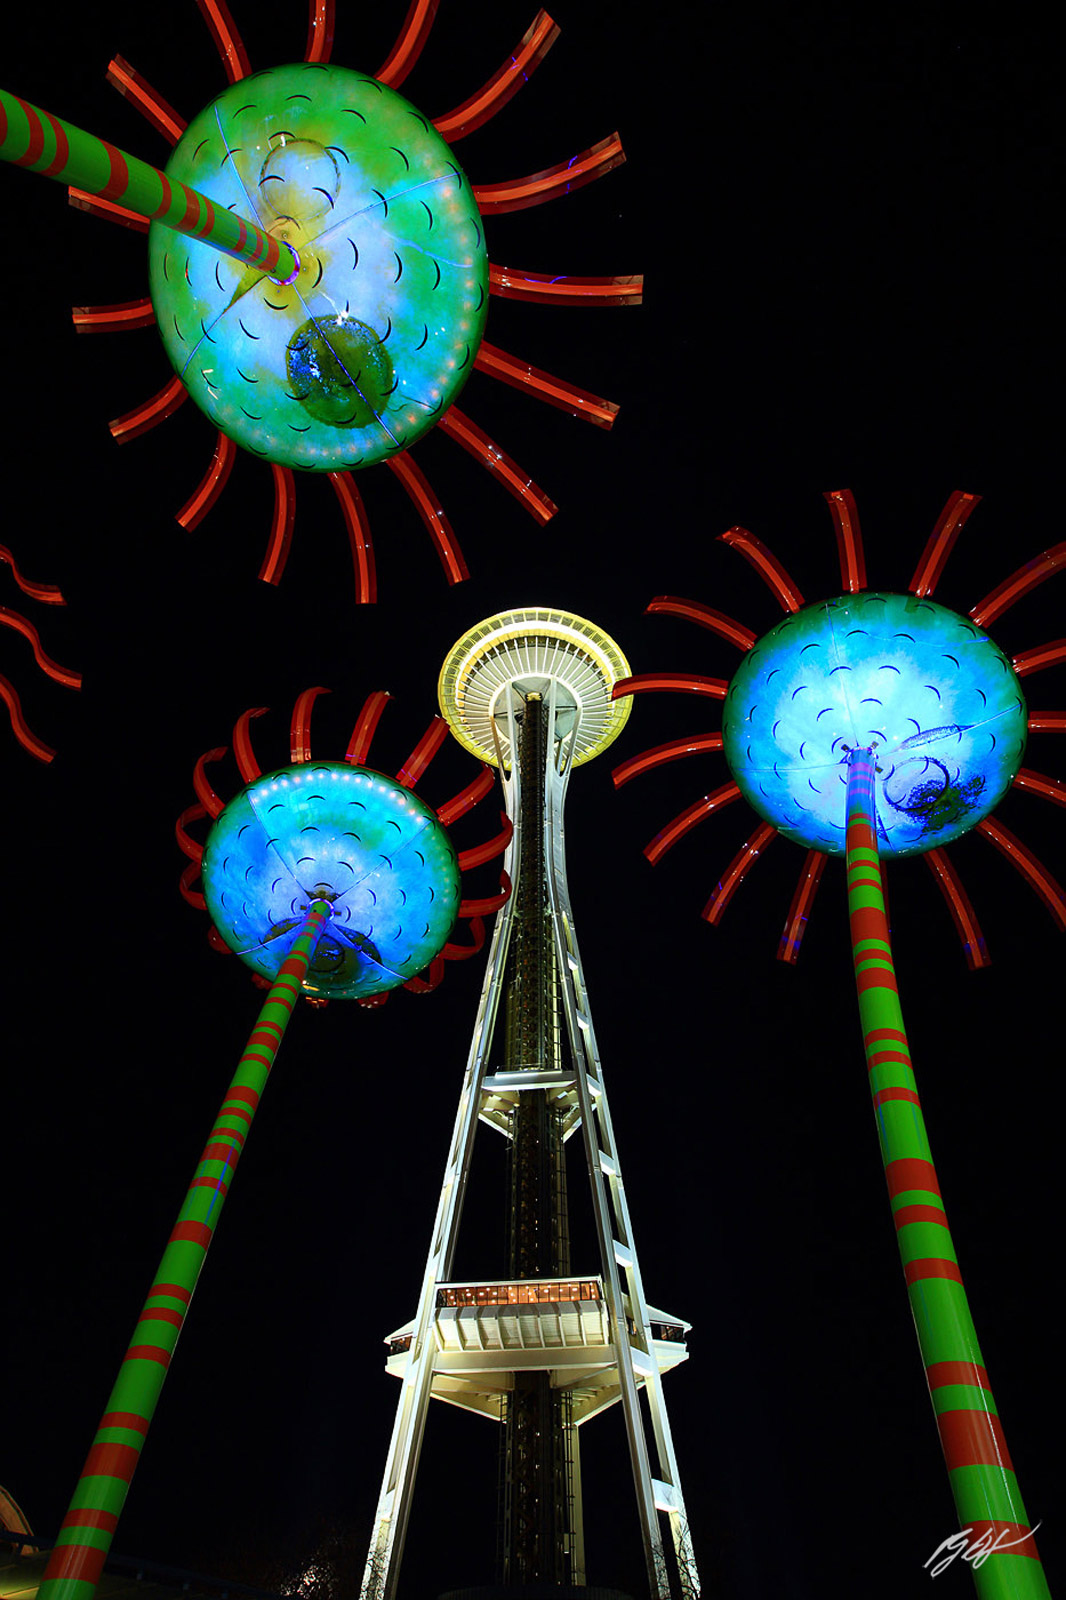 Giant Singing Flower Sculpture and the Space Needle in Seattle Center in Seattle Washington